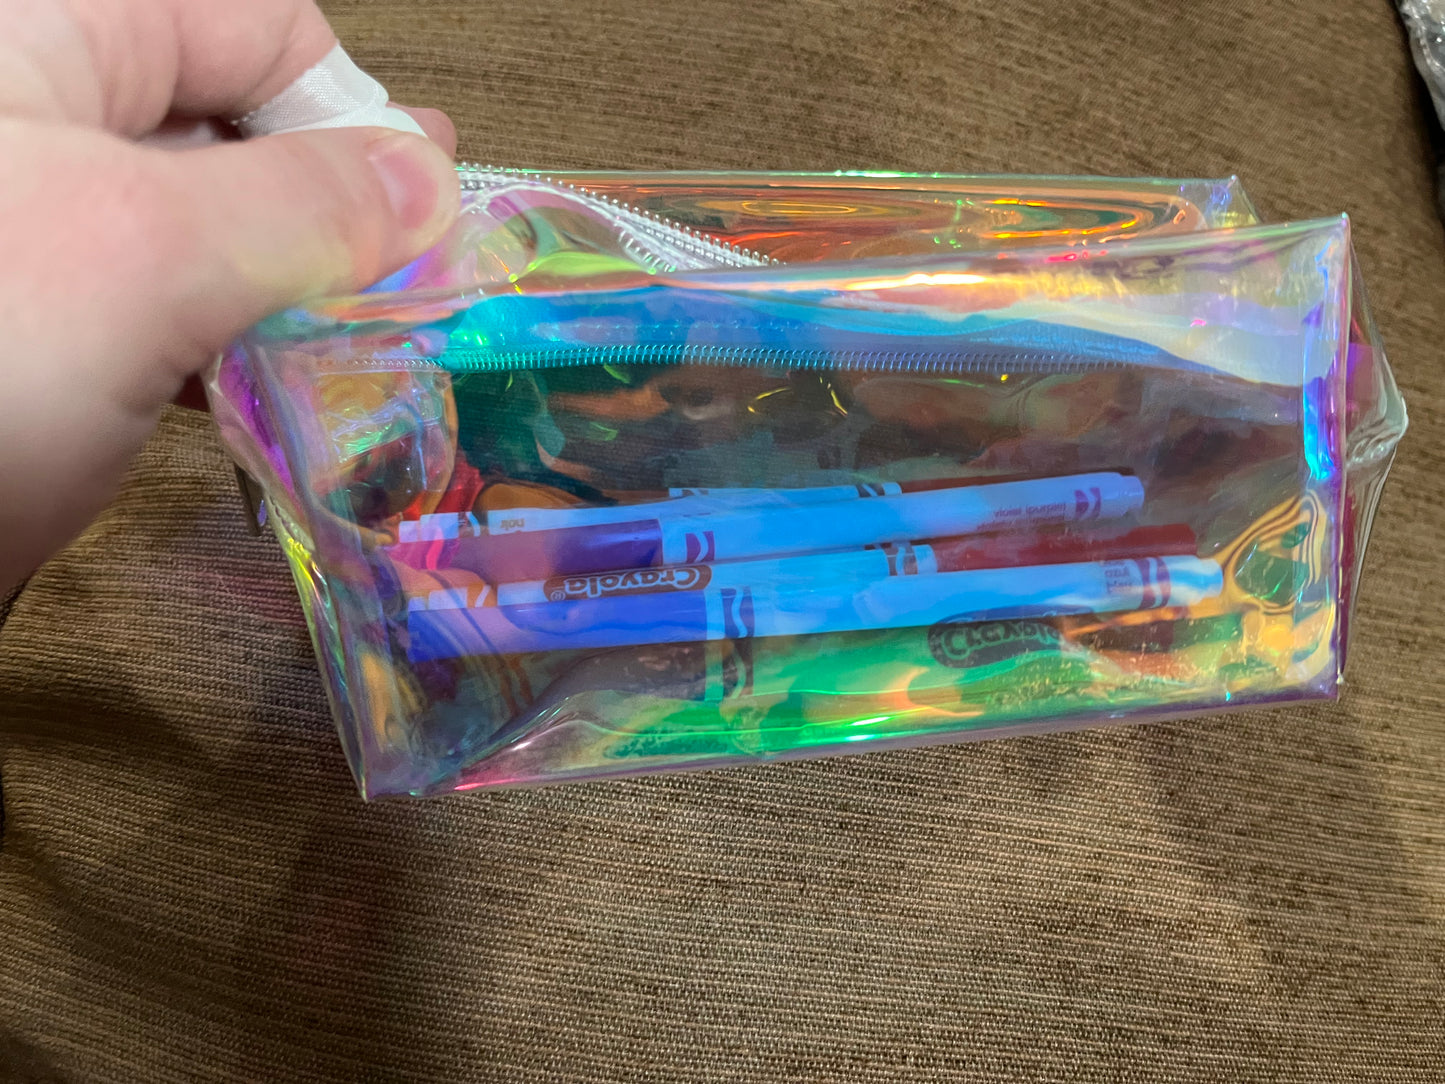 Holographic Zipper Pouch